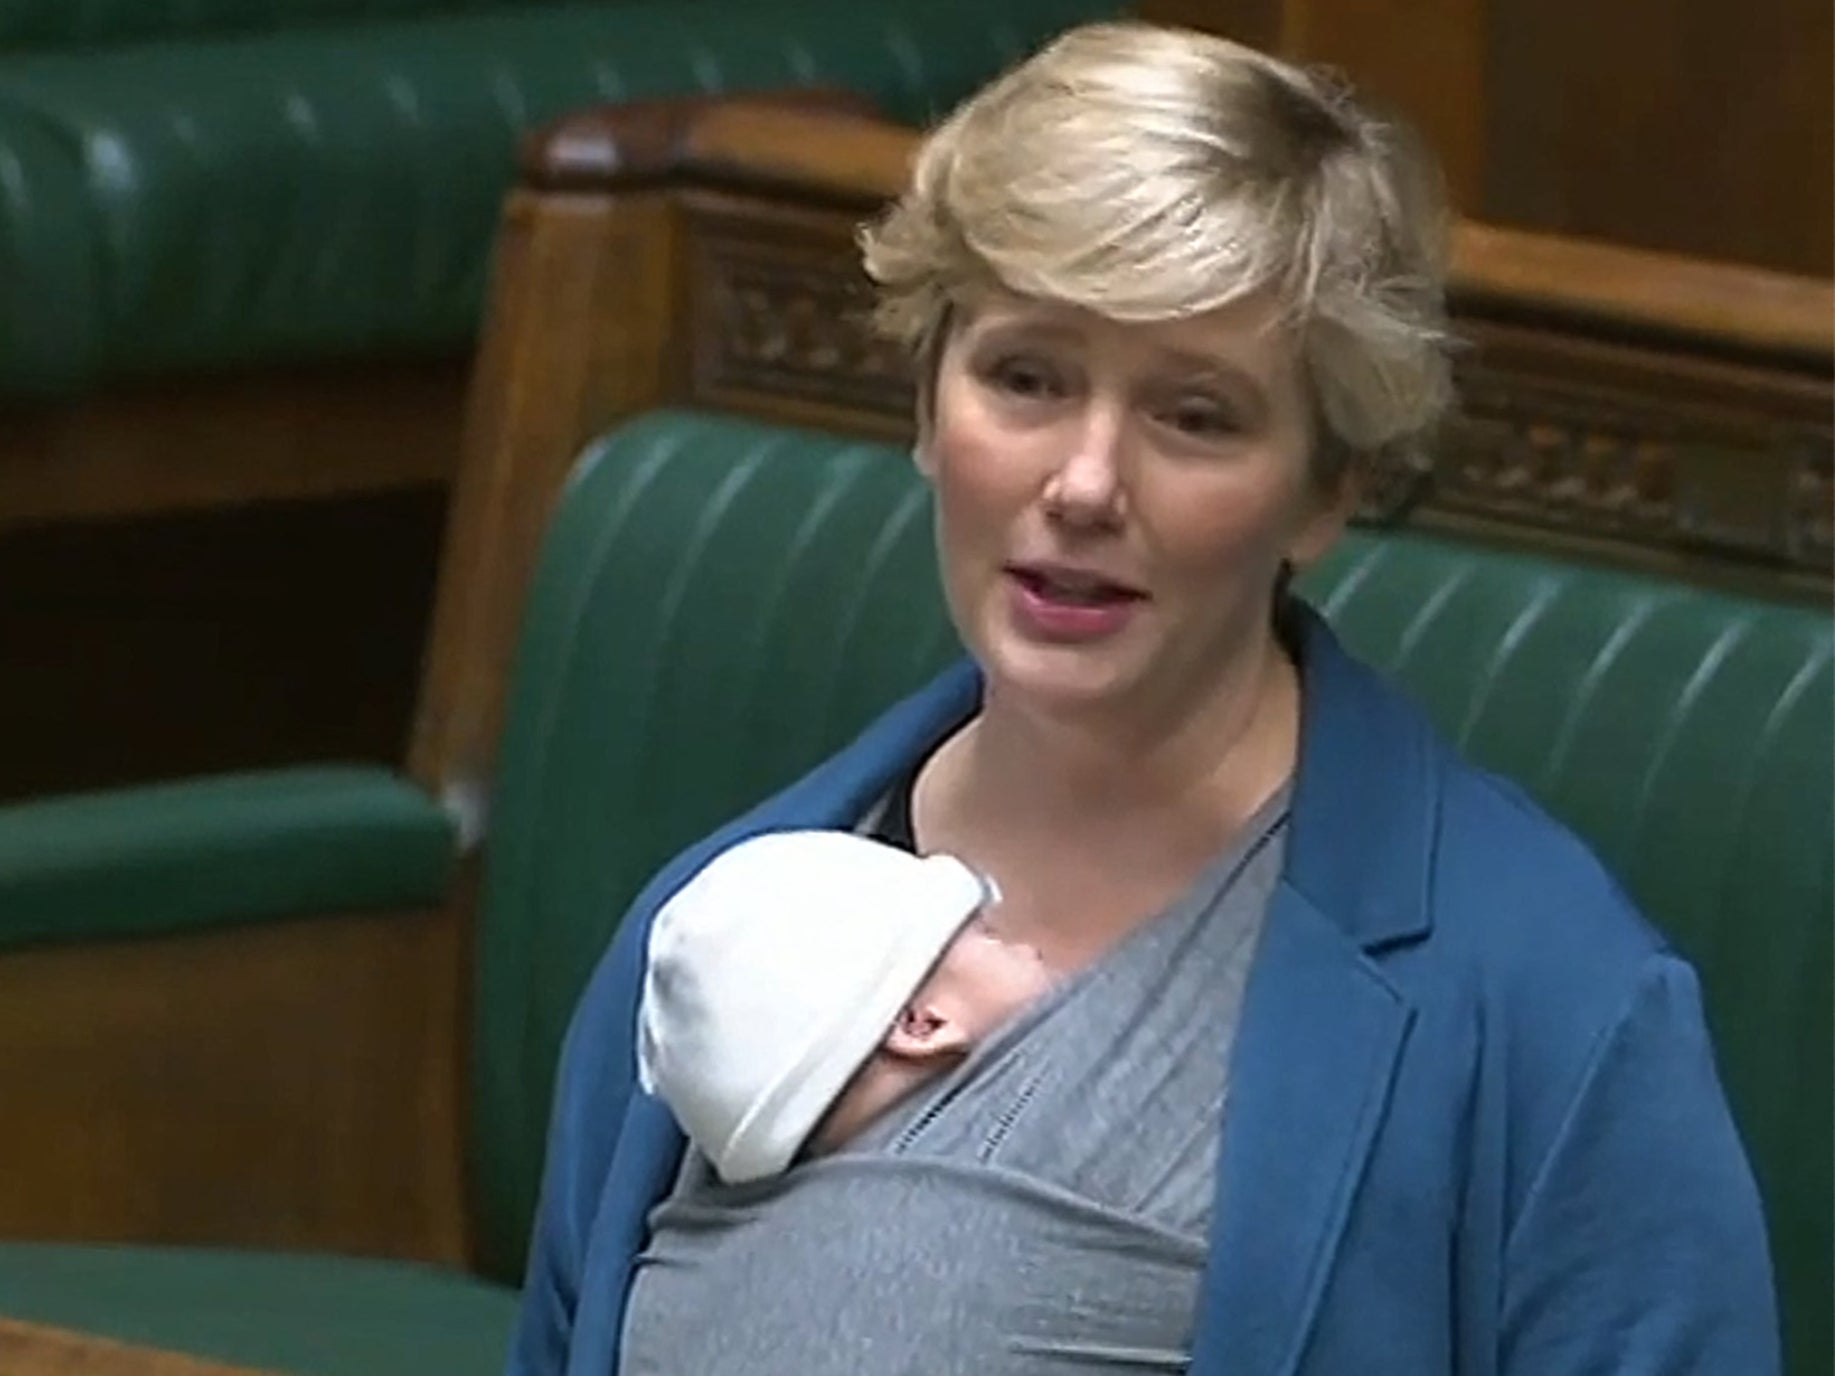 MP Stella Creasy was told off for bringing her 13-week-old son into a Commons debate this week